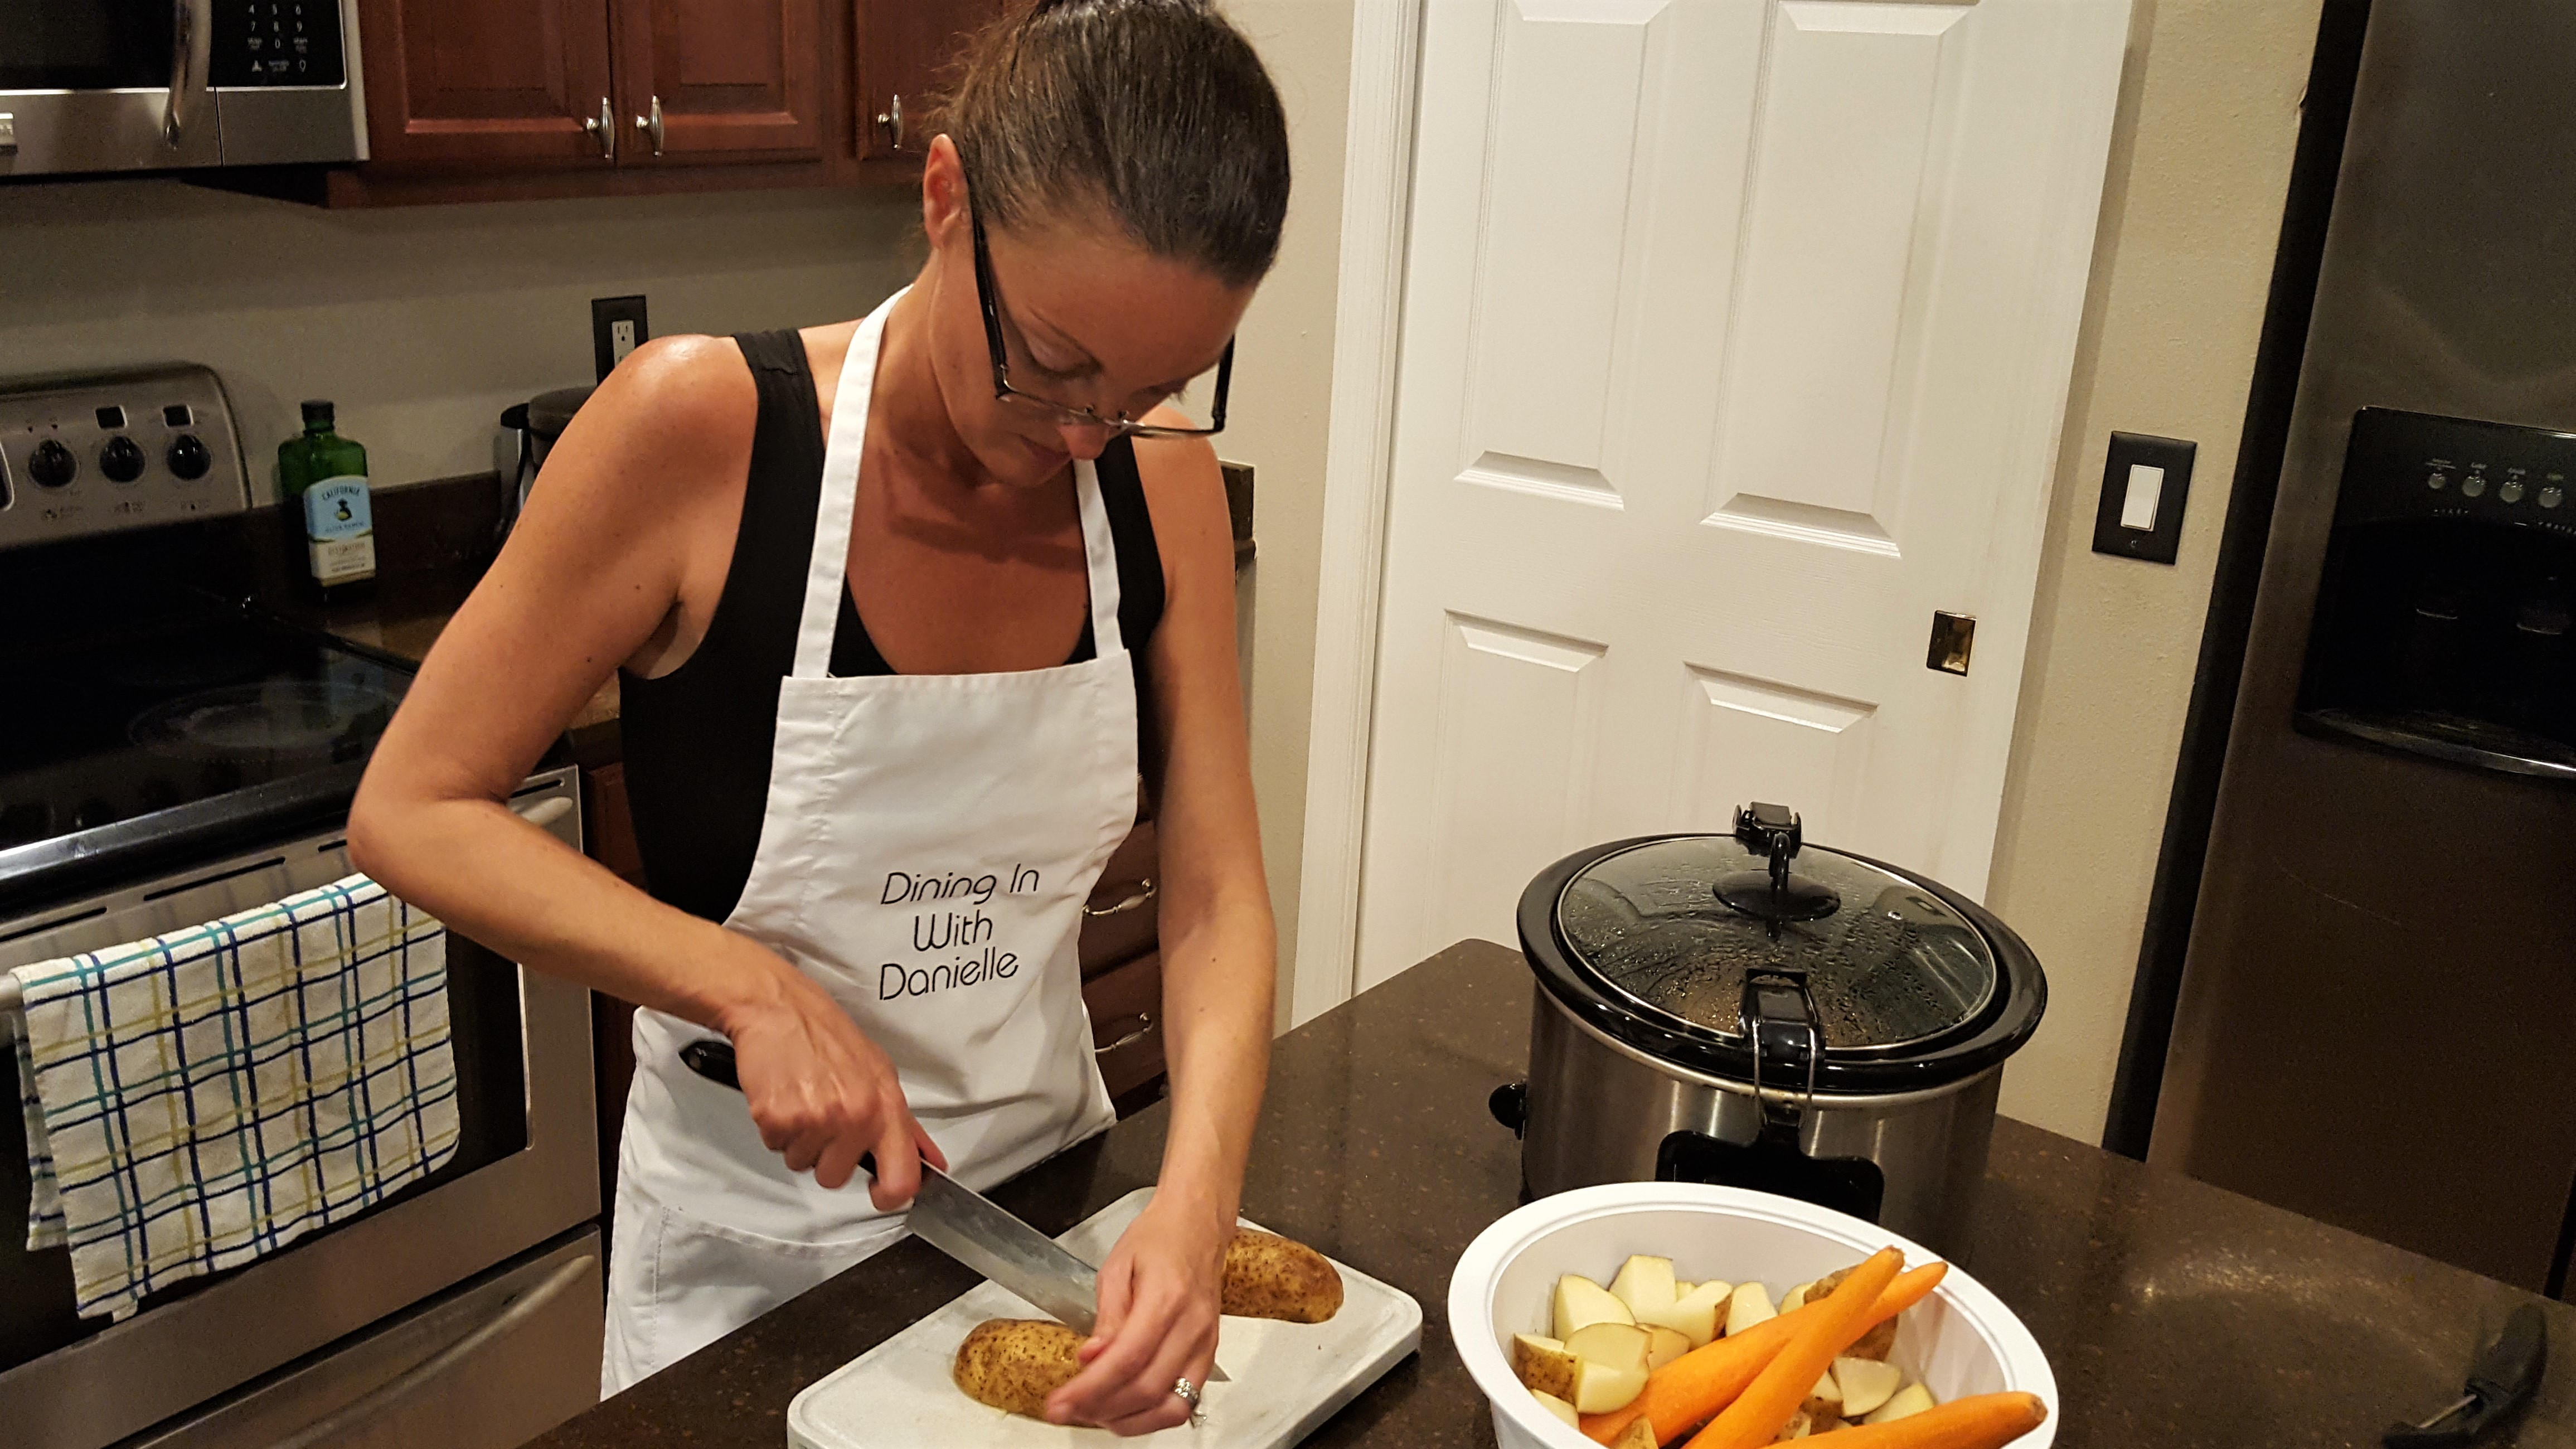 How we cut up our Potatoes and Carrots for Pot Roast - Dining in with Danielle